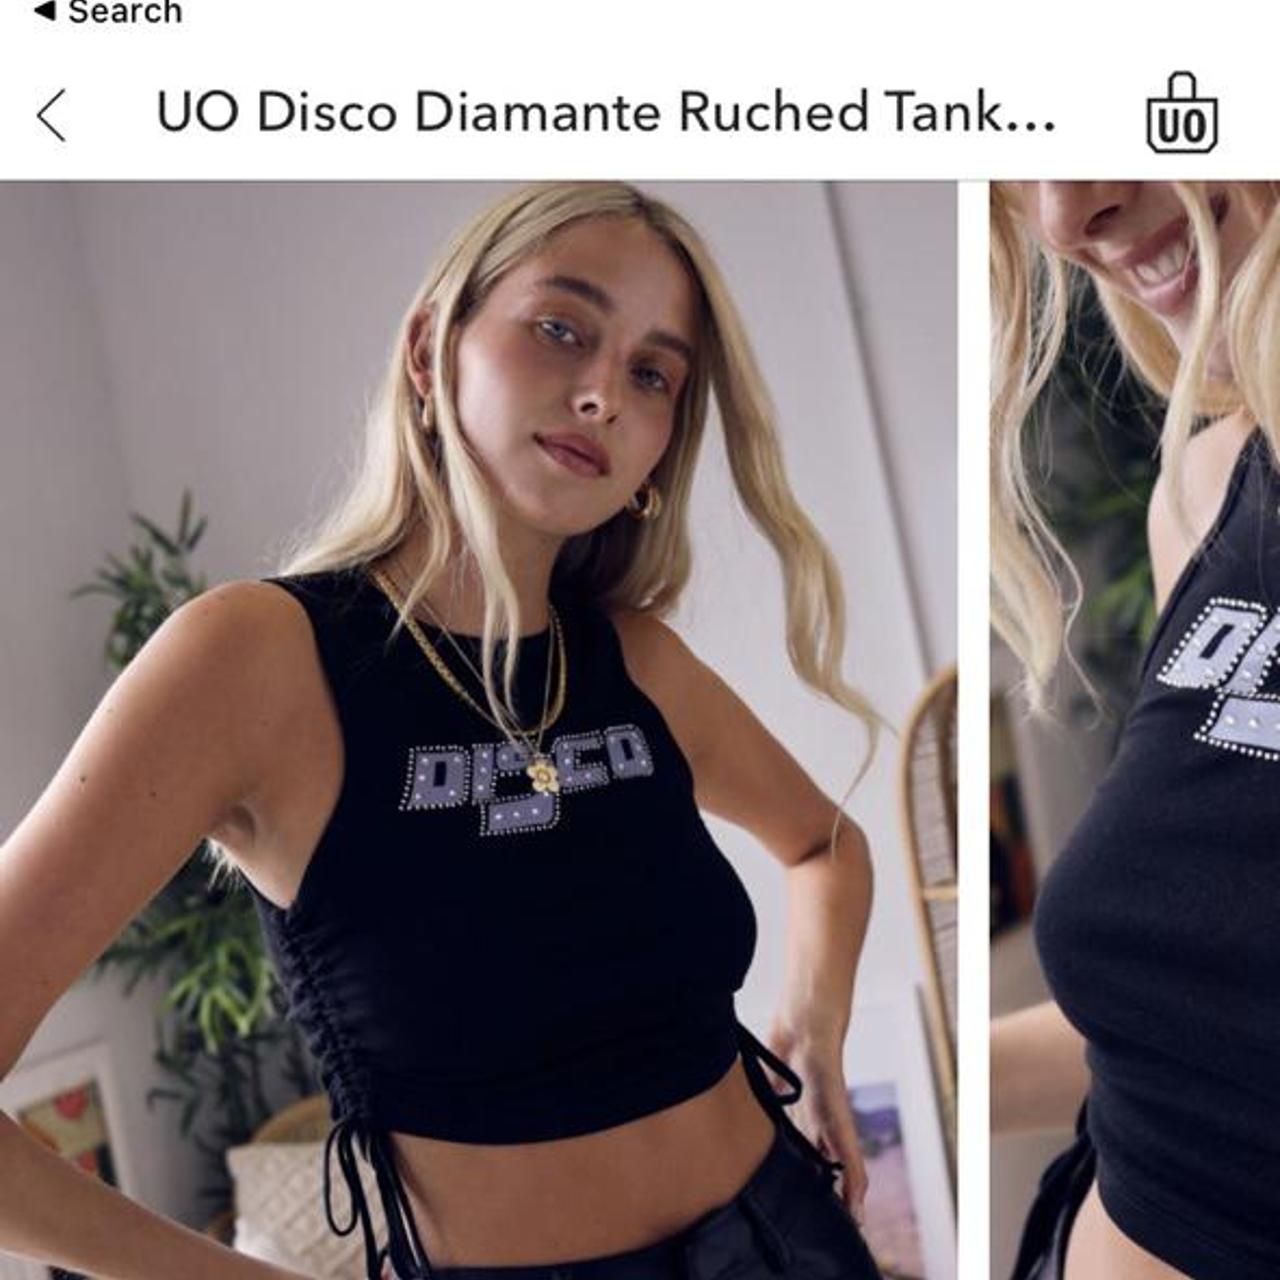 Product Image 1 - Urban outfitters tank top disco